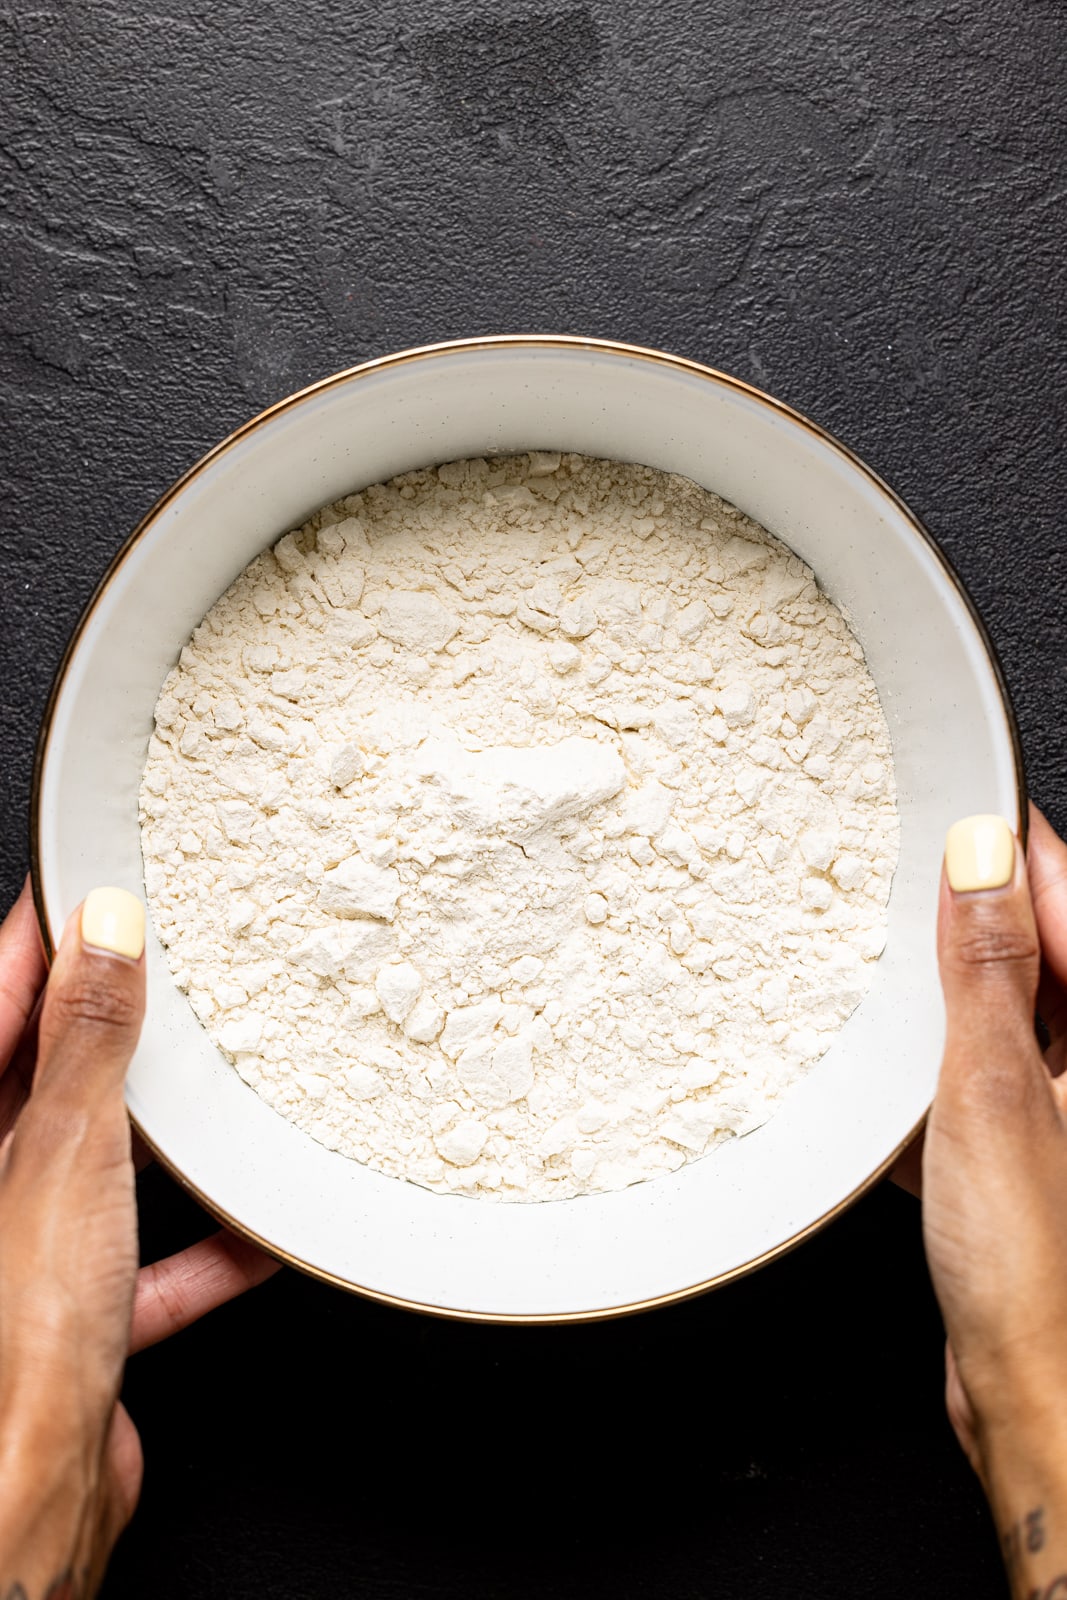 Flour in a white bowl on a black table.